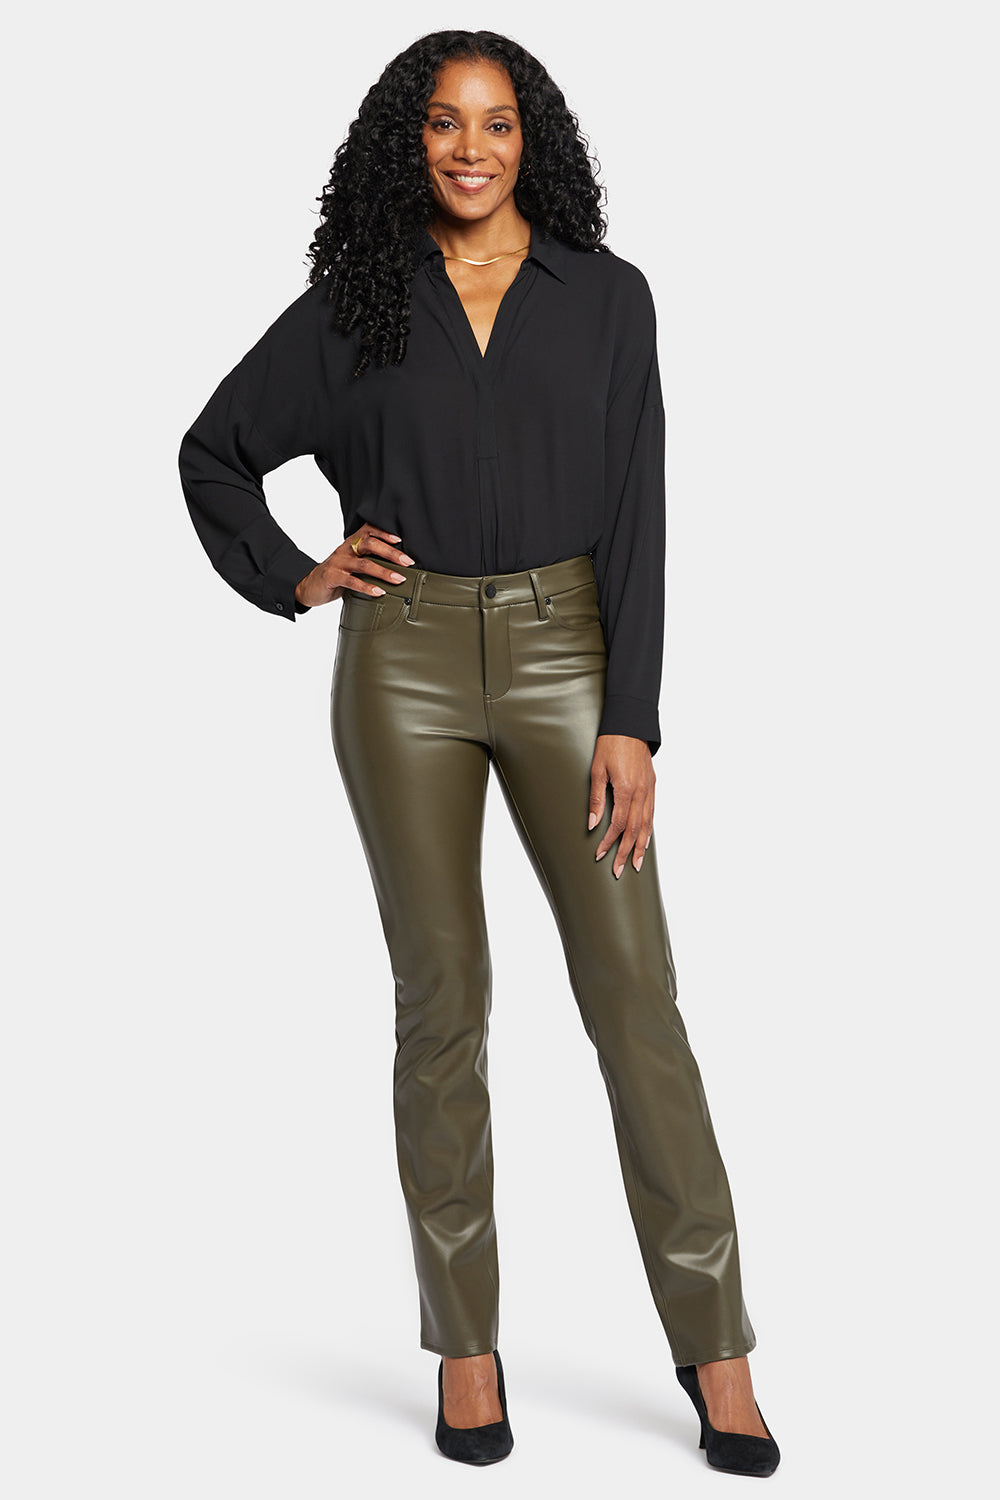 Faux Leather Marilyn Straight Pants Sculpt-Her™ Collection - Ripe Olive  Green | NYDJ